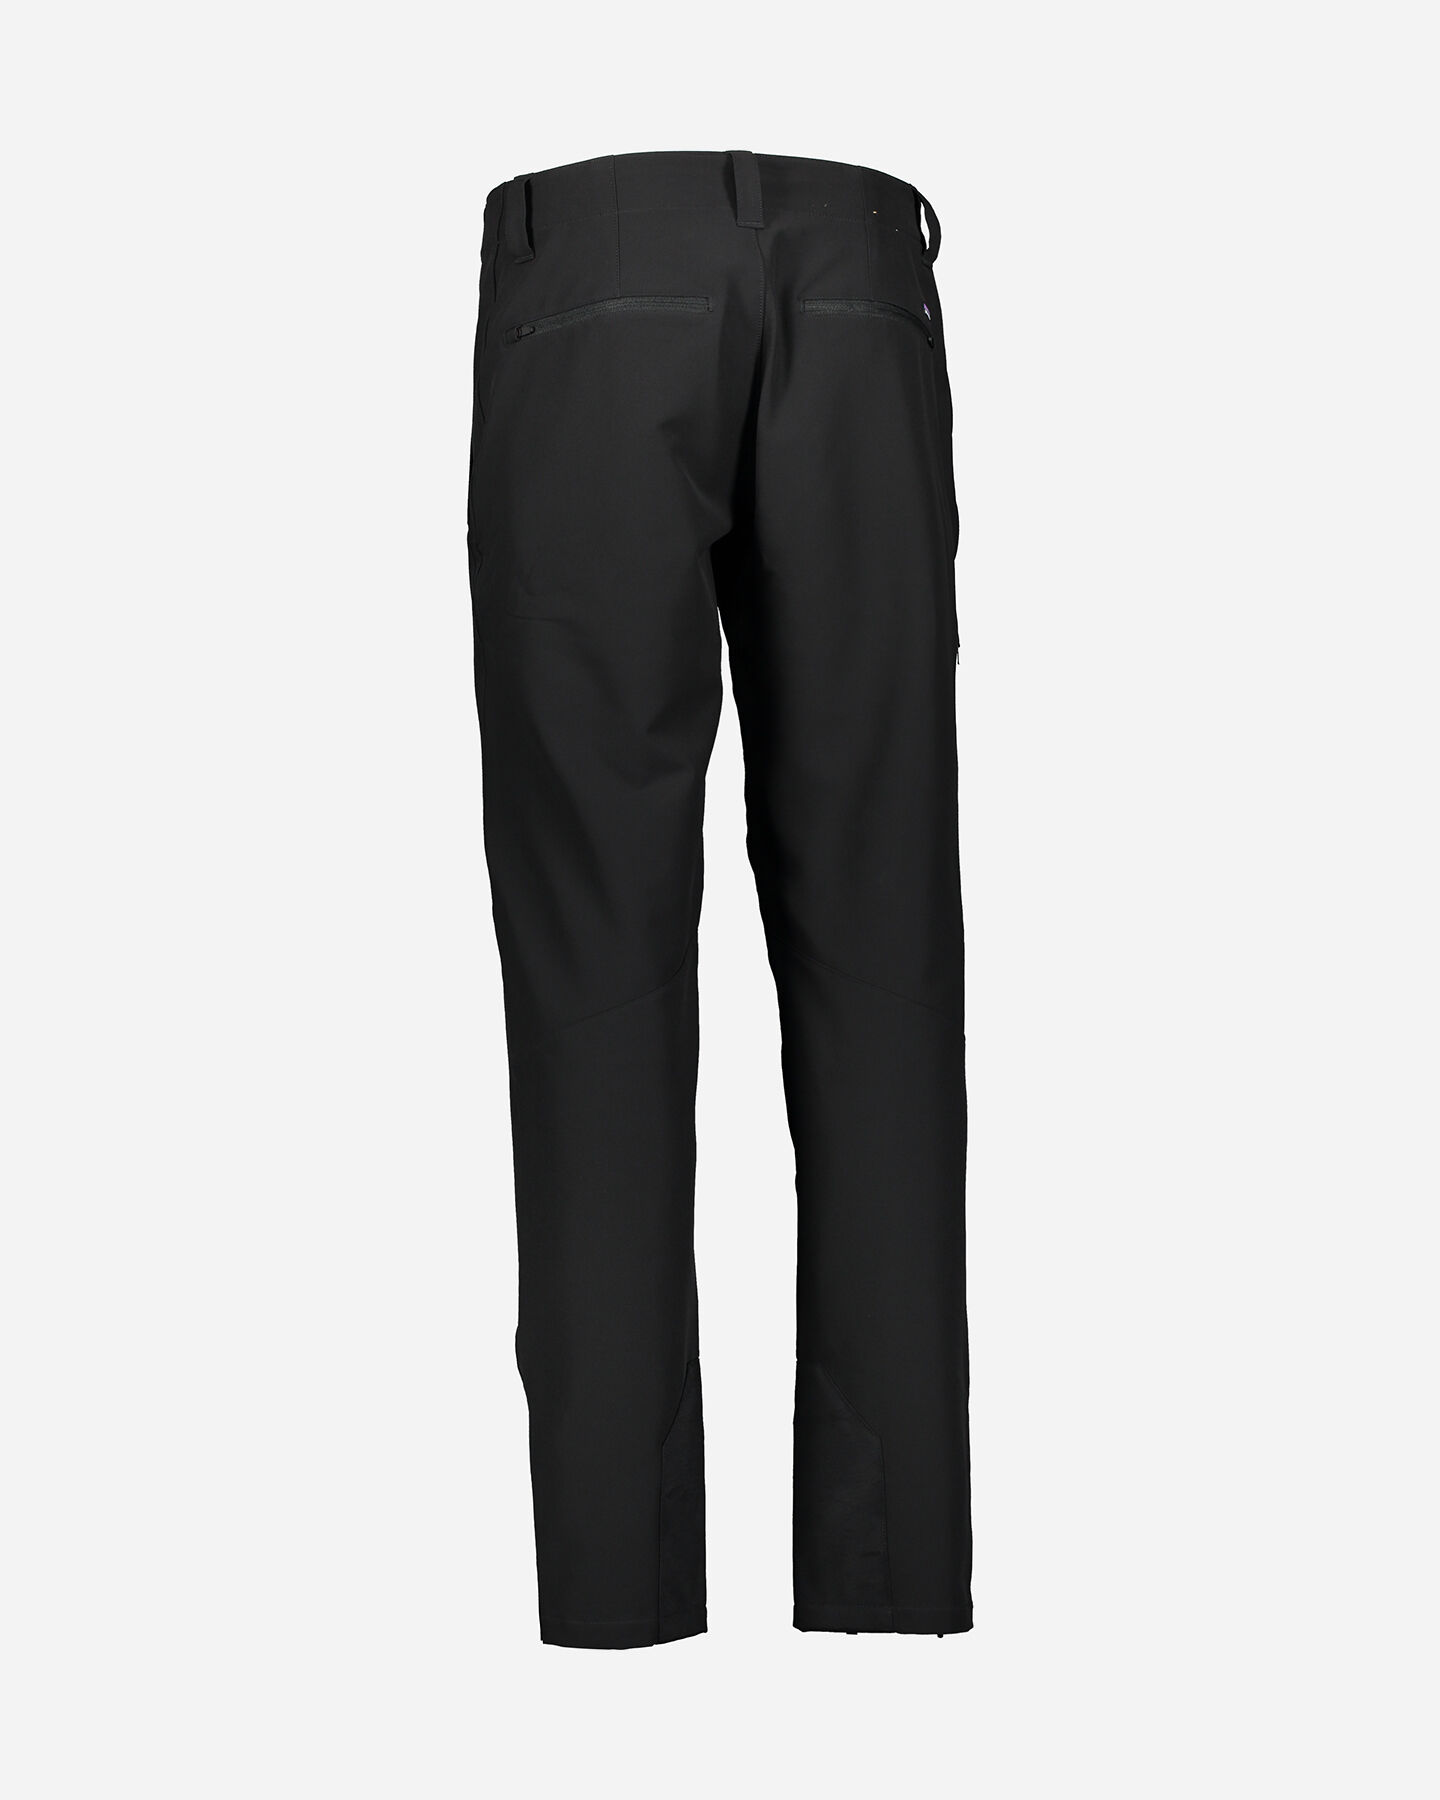  Pantalone outdoor PATAGONIA CRESTVIEW M S4081432|BLK|28 scatto 2